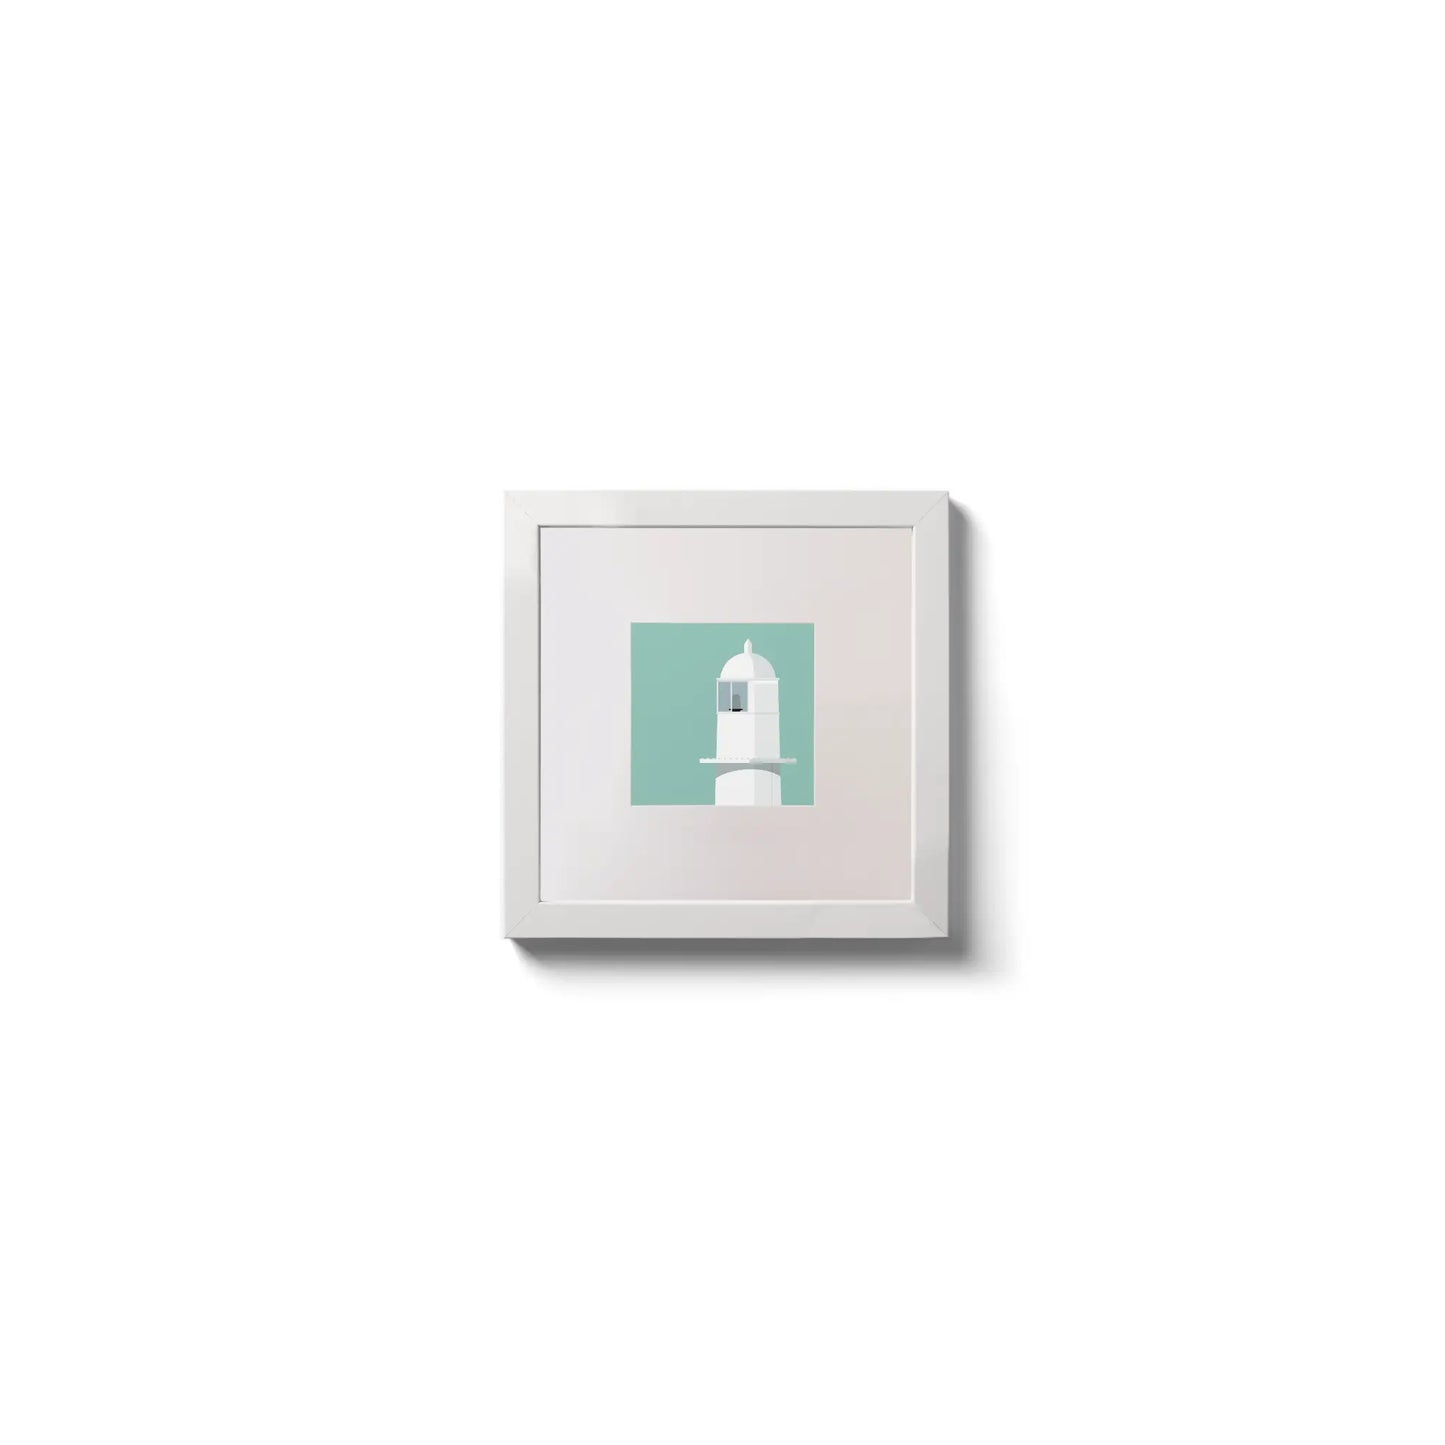 Illustration of Barrack Point lighthouse on an ocean green background,  in a white square frame measuring 10x10cm.